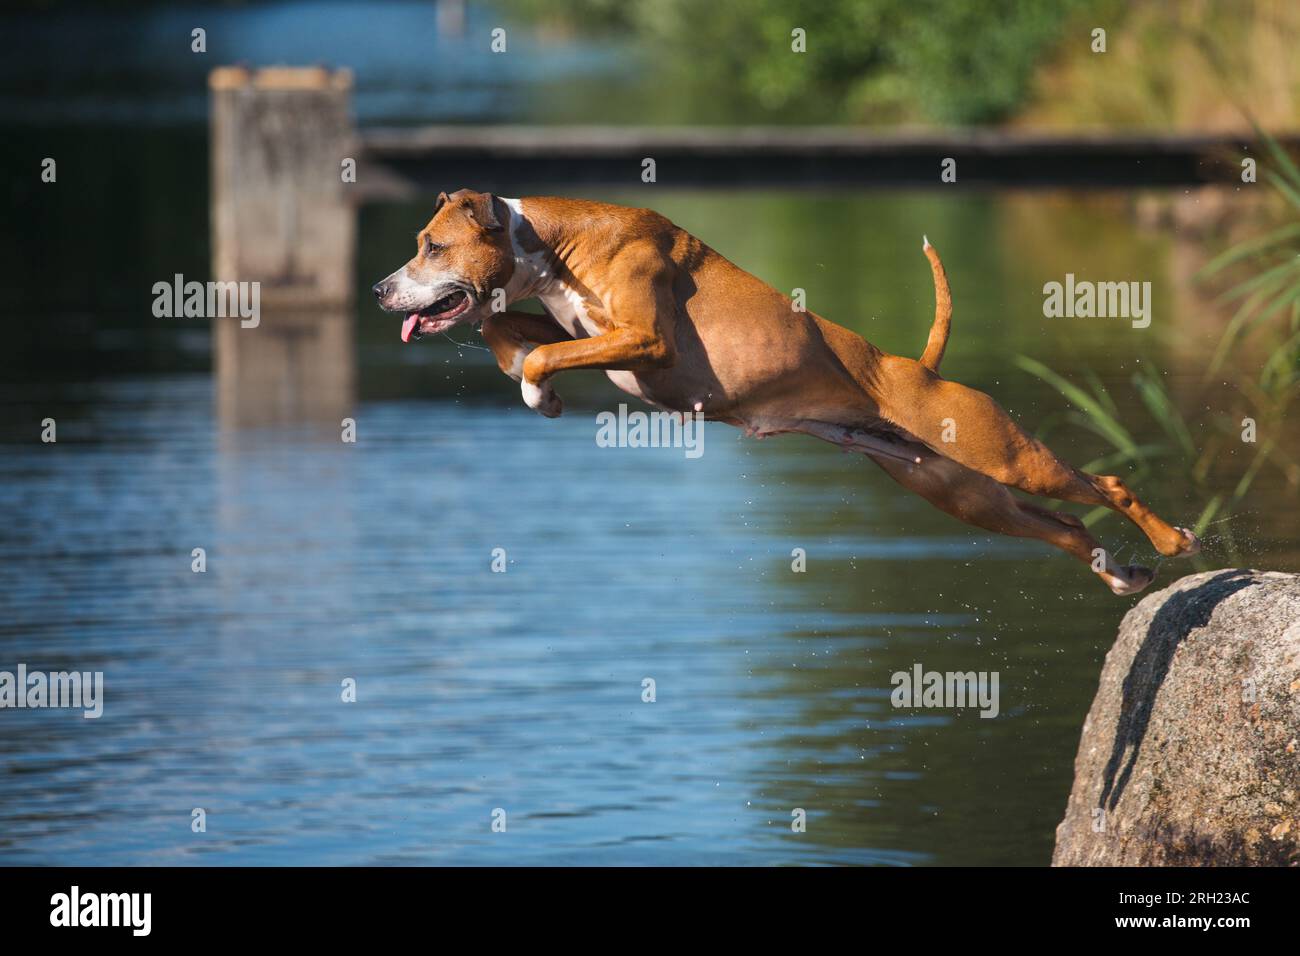 Brown dog jumping into the water on a hot summer day Stock Photo